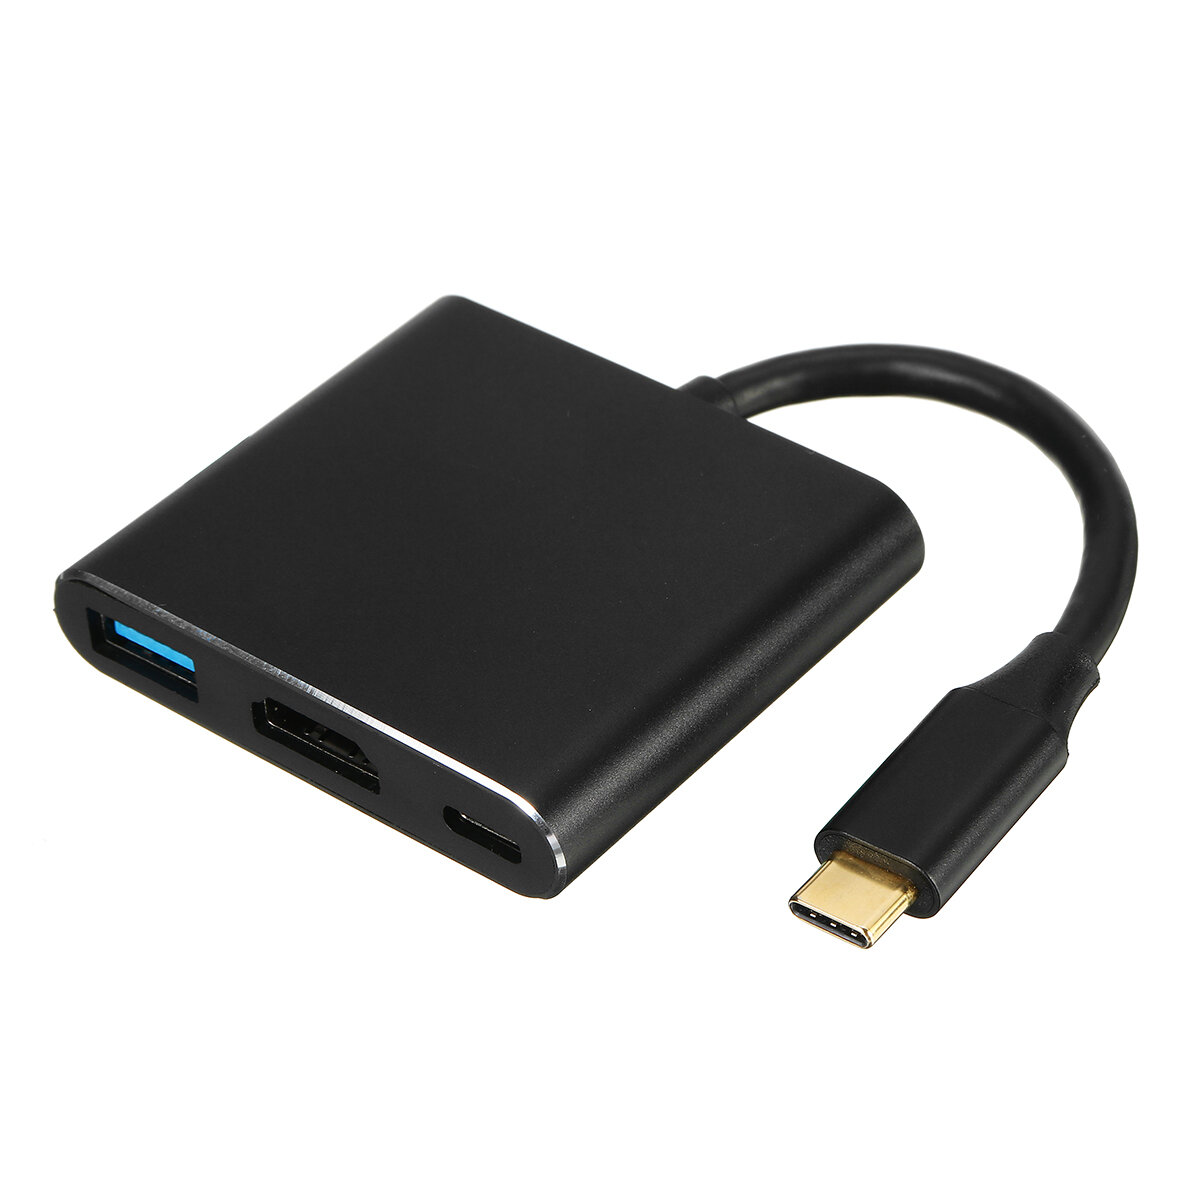 USB3.0 Docking Station Type C to HDMI USB HUB Adapter Support 4K 30HZ for Notebook MacBook Expansion